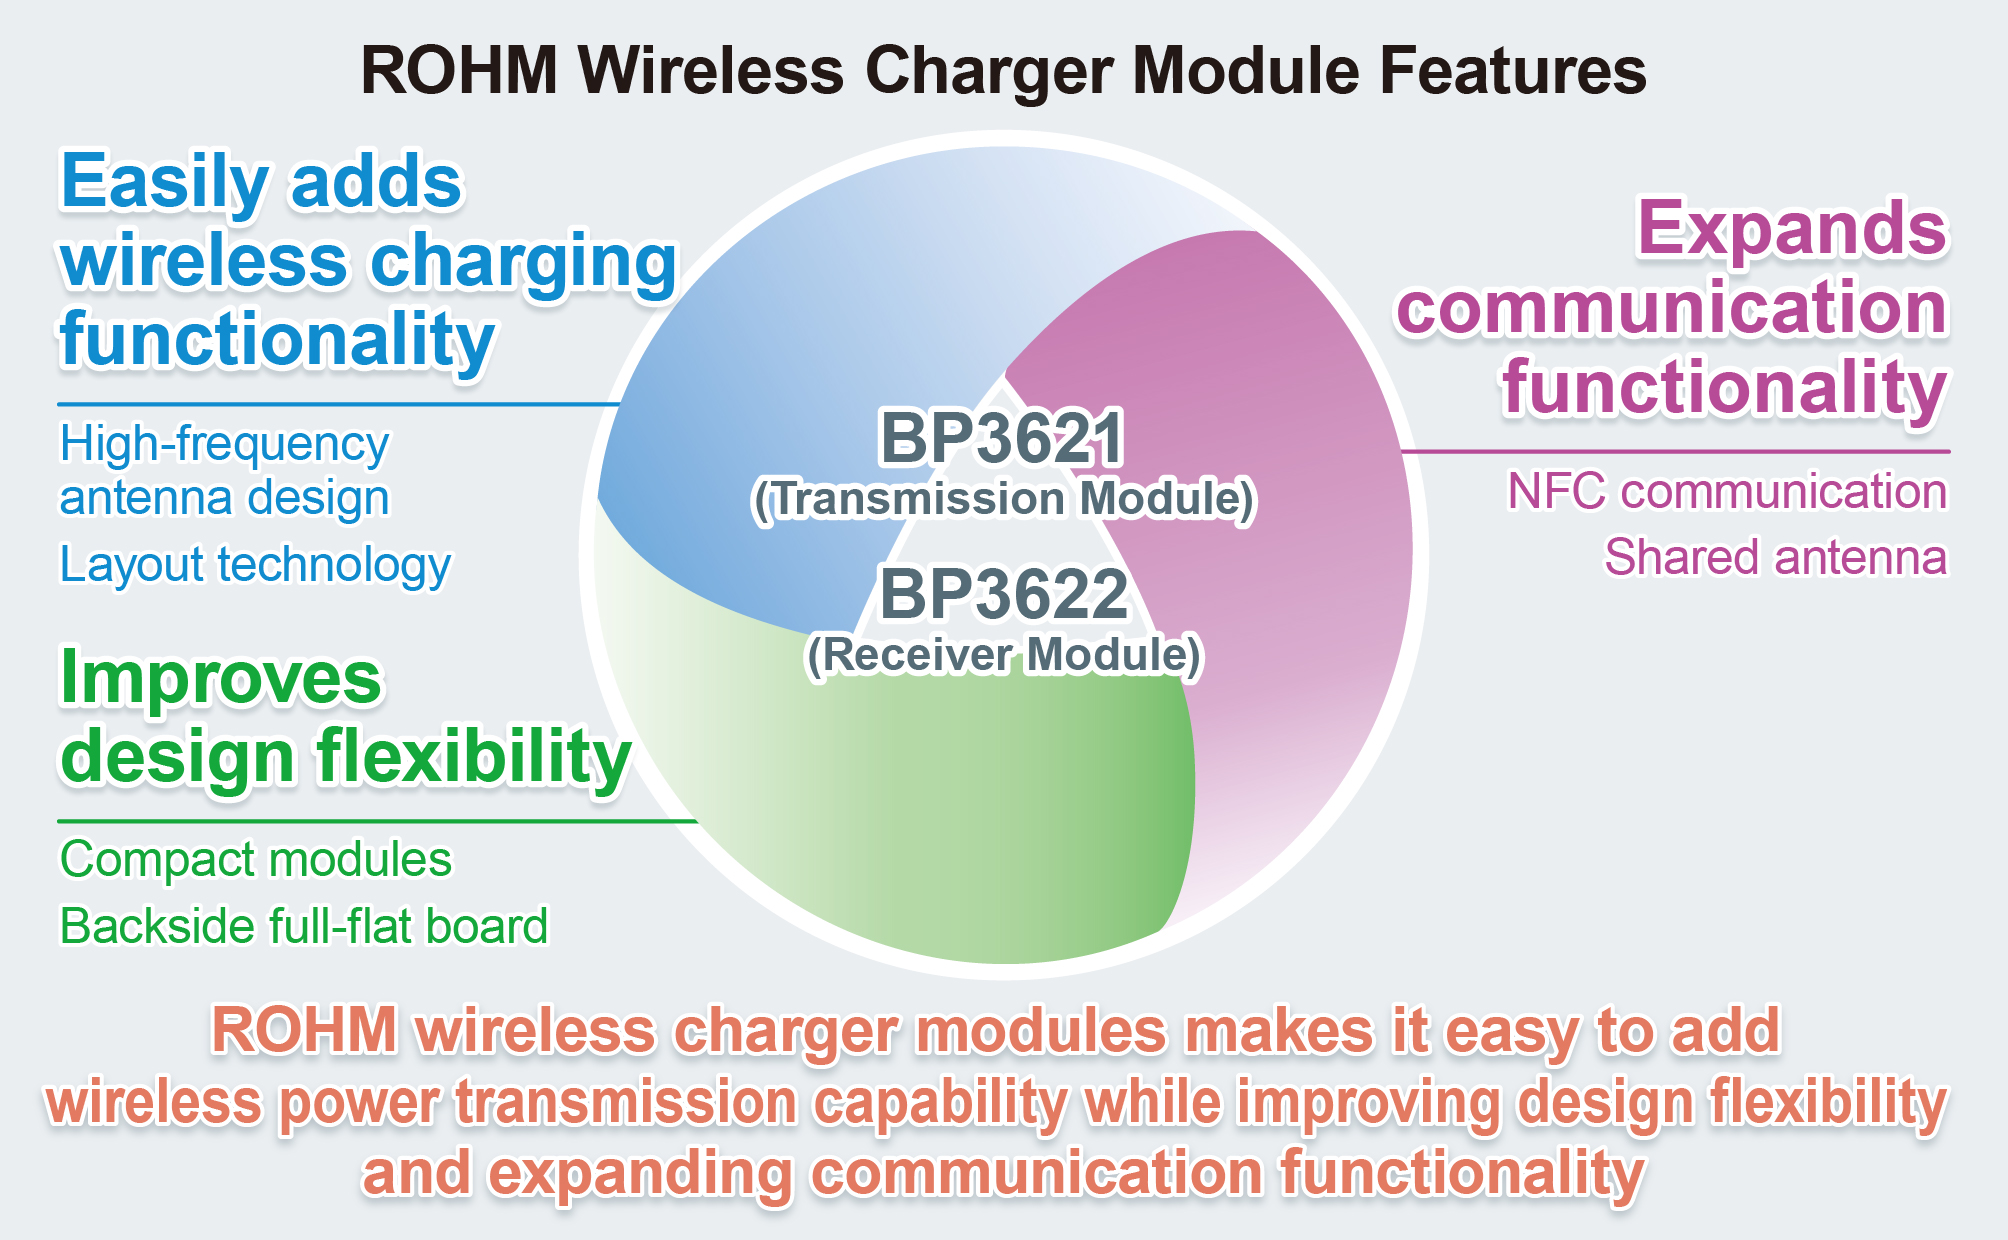 New Wireless Charger Module from ROHM